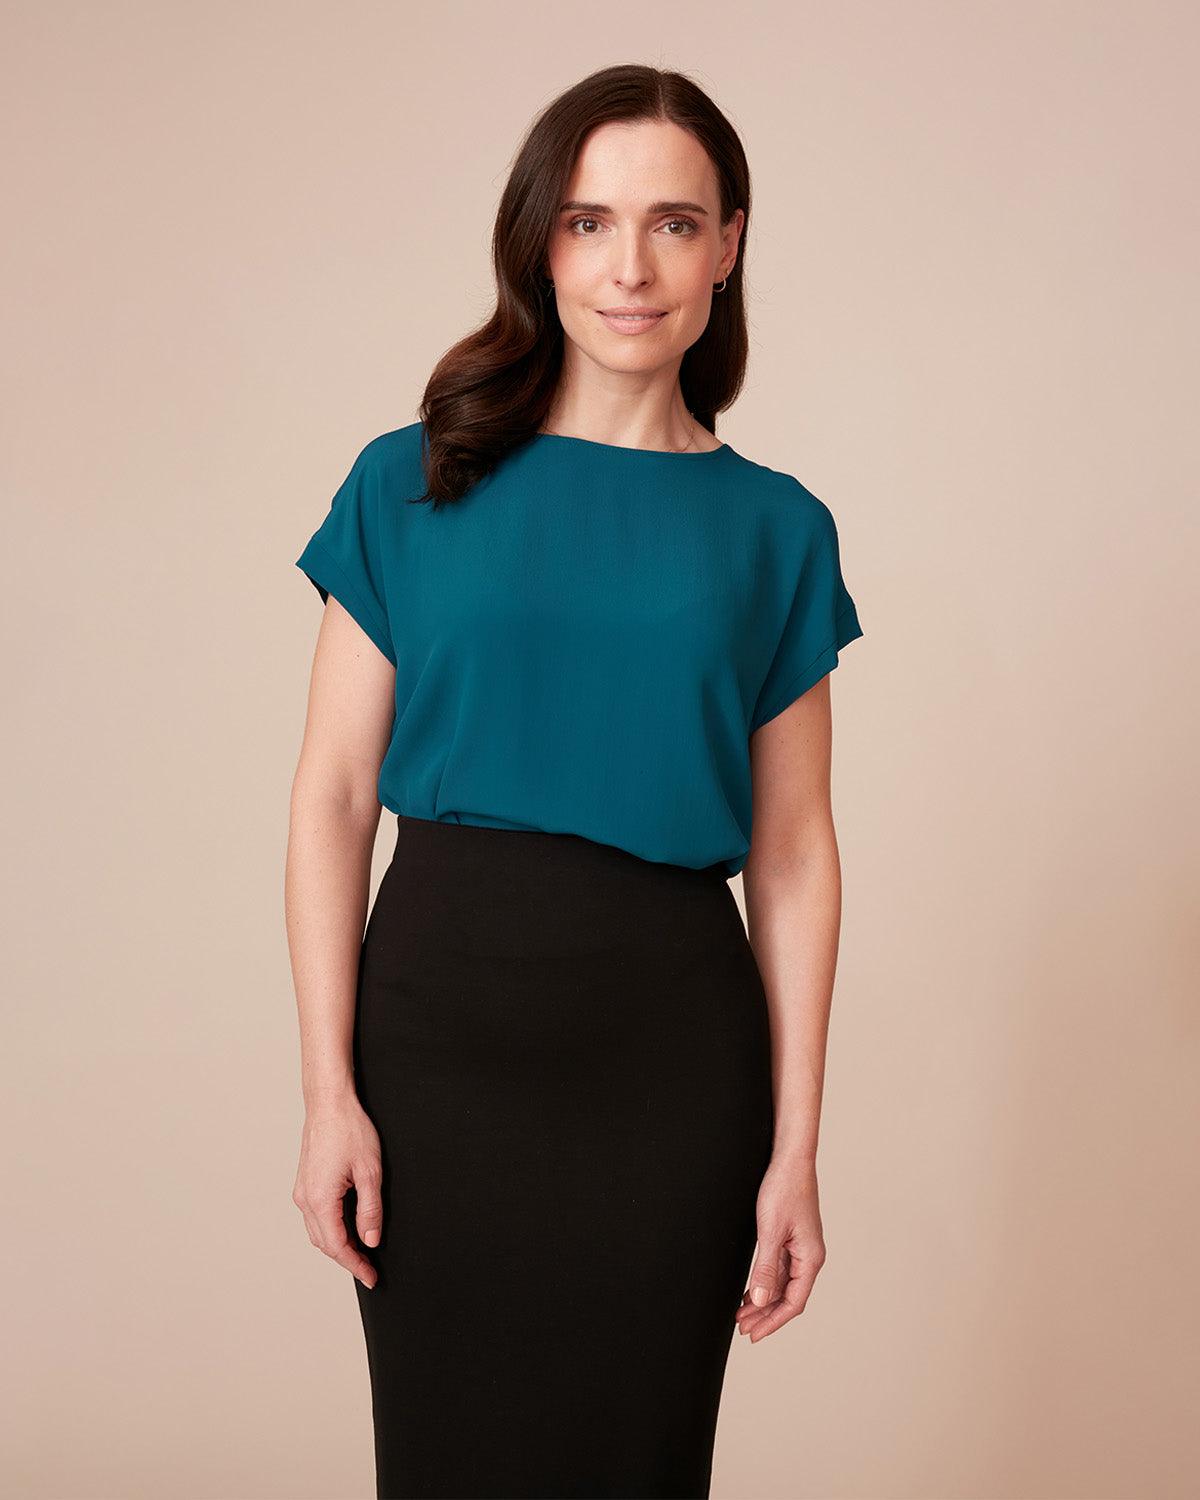 "#color_TOPAZ|Daphne is 5'9", wearing a size S